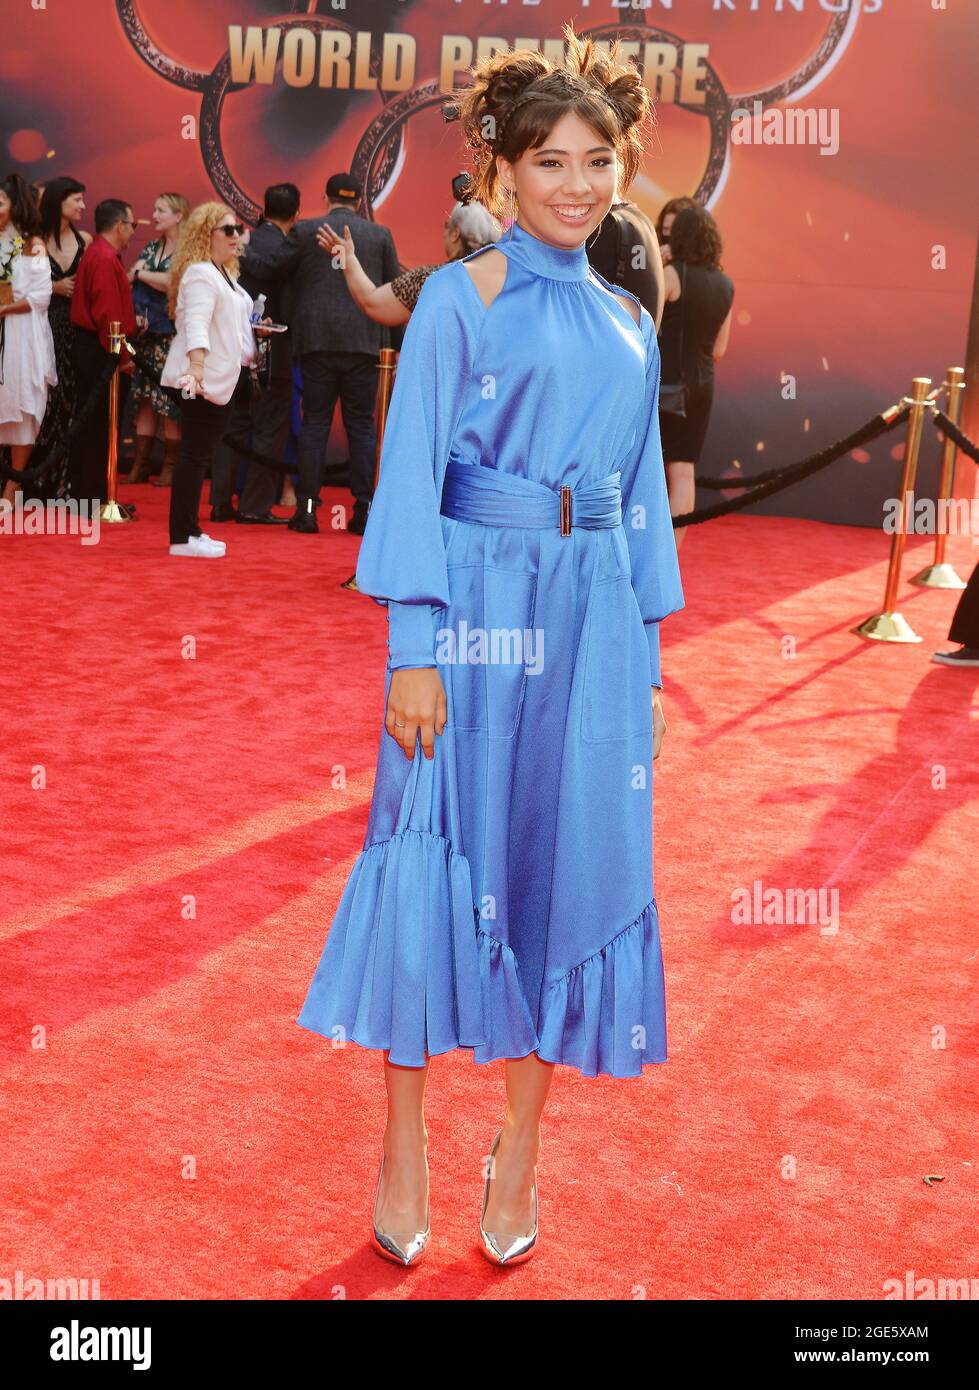 Los Angeles, USA. 17th Aug, 2021. Xochiti Gomez attends the Disney Marvel Premiere of Shang-Chi and the Legend of the Ten Rings at the El Capitan Theatre in Los Angeles. August 16, 2021. Credit: Tsuni/USA/Alamy Live News Stock Photo